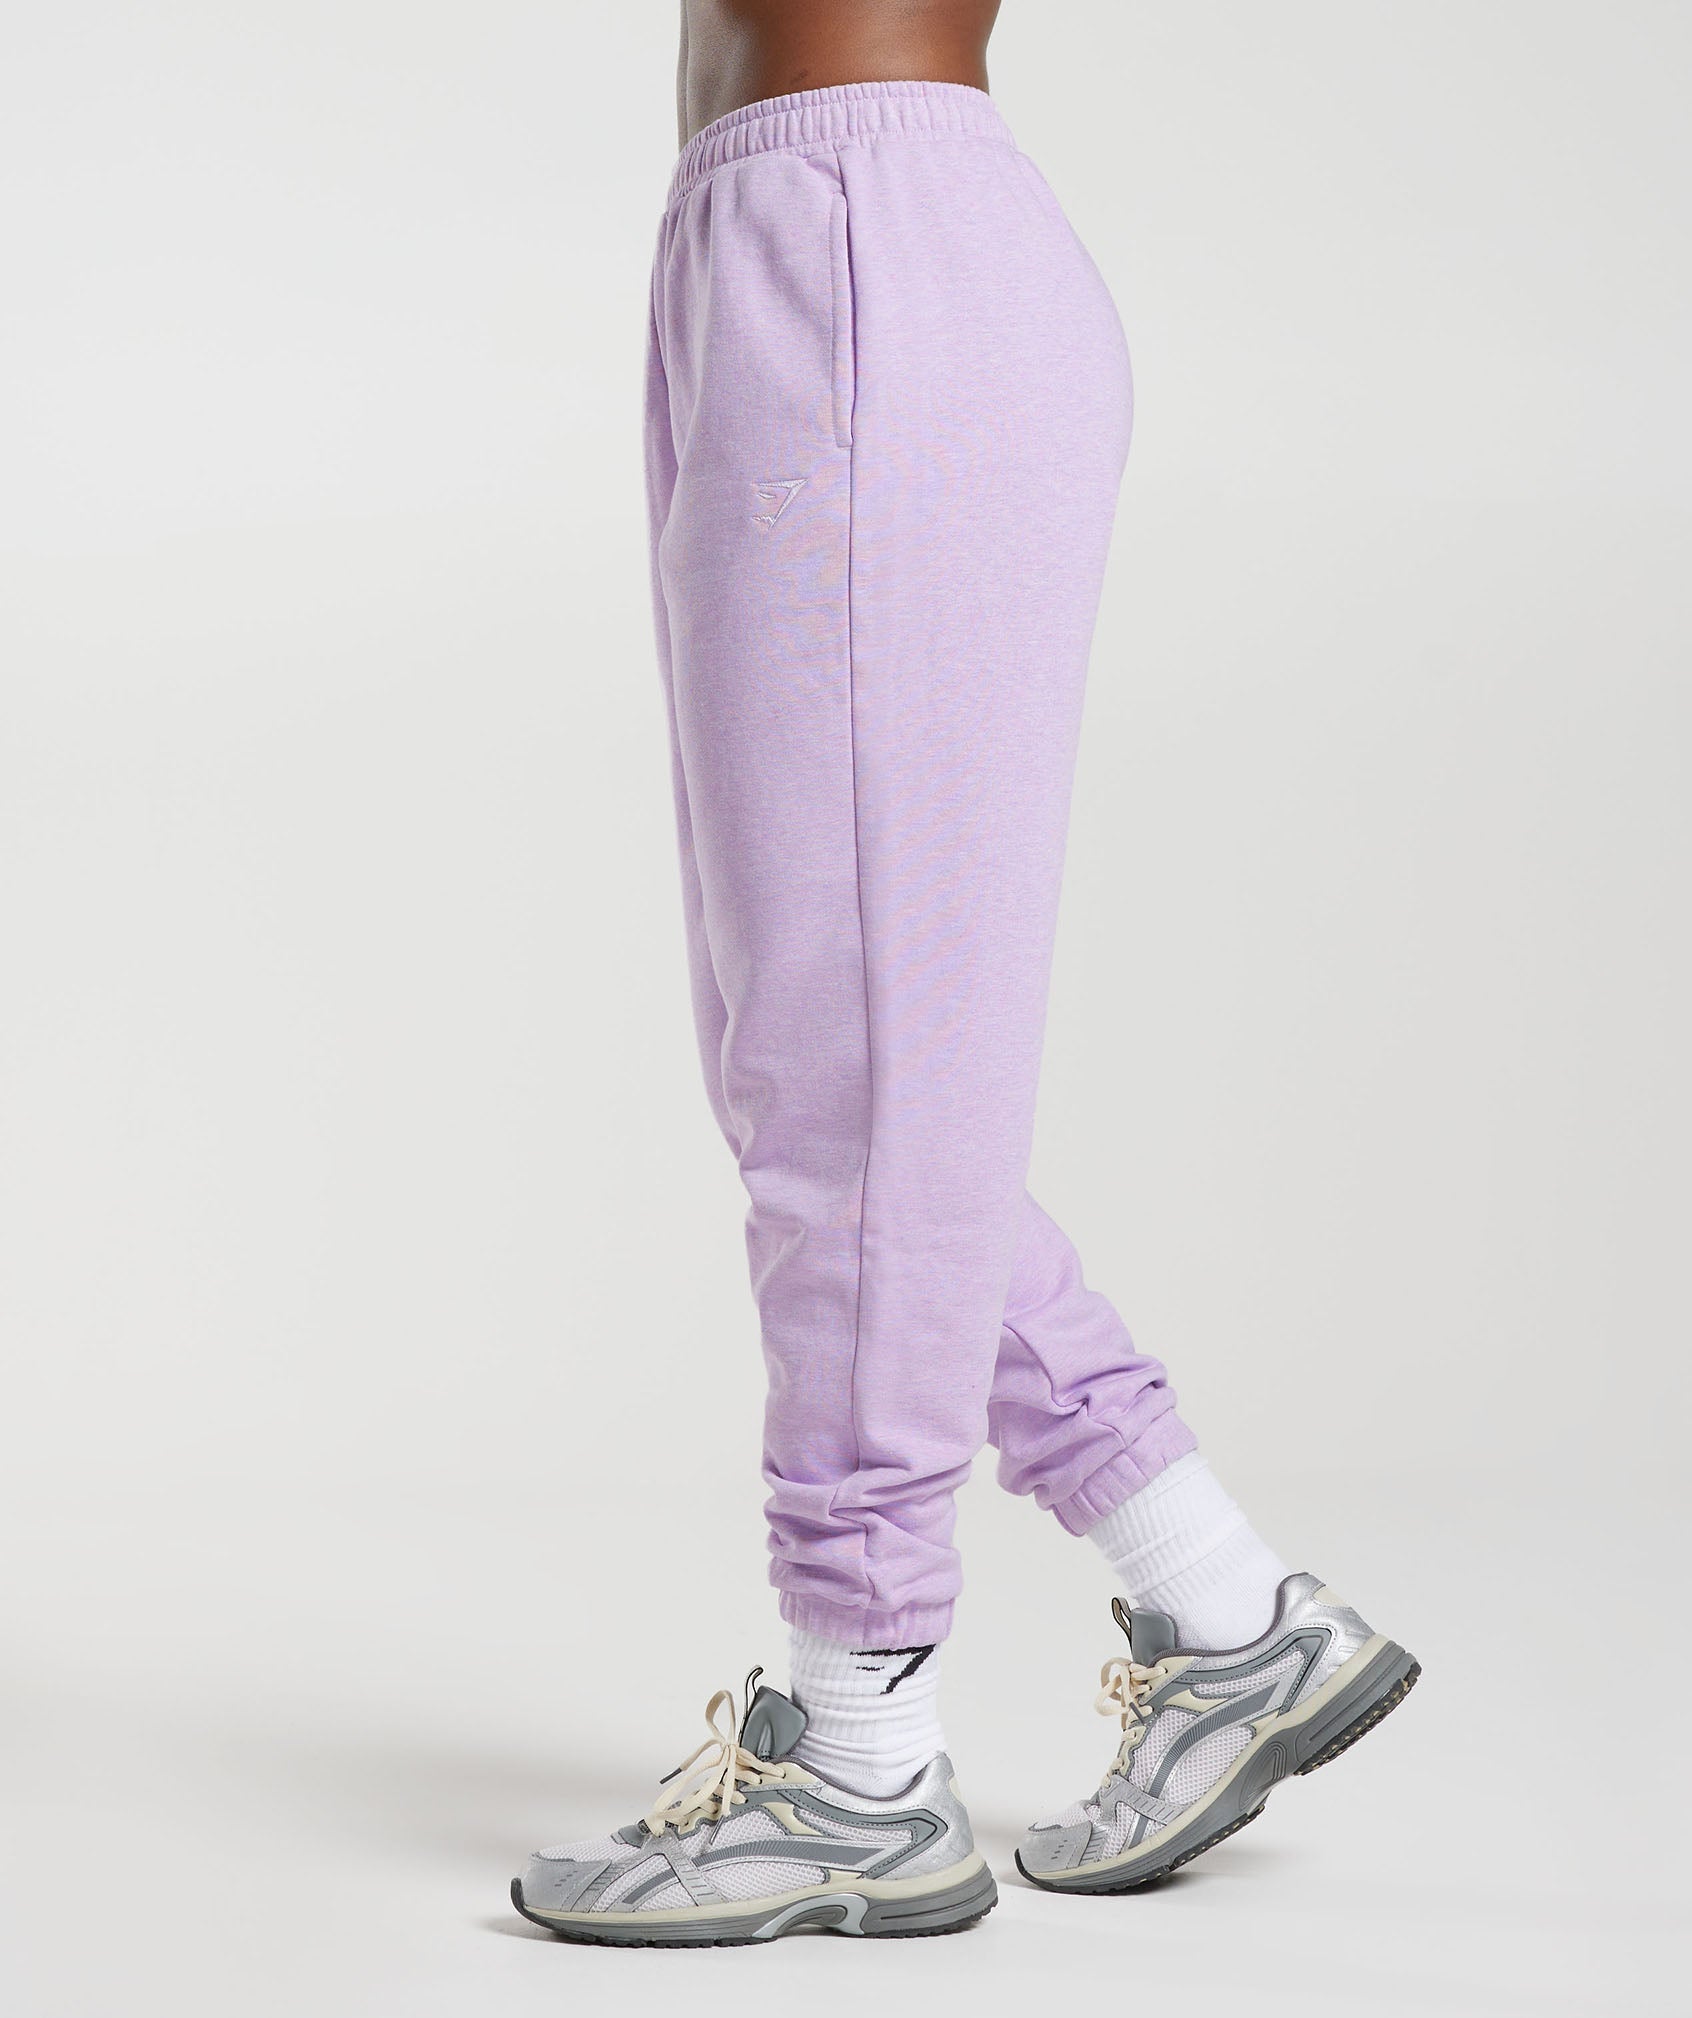 Rest Day Sweats Joggers in Aura Lilac Marl - view 3